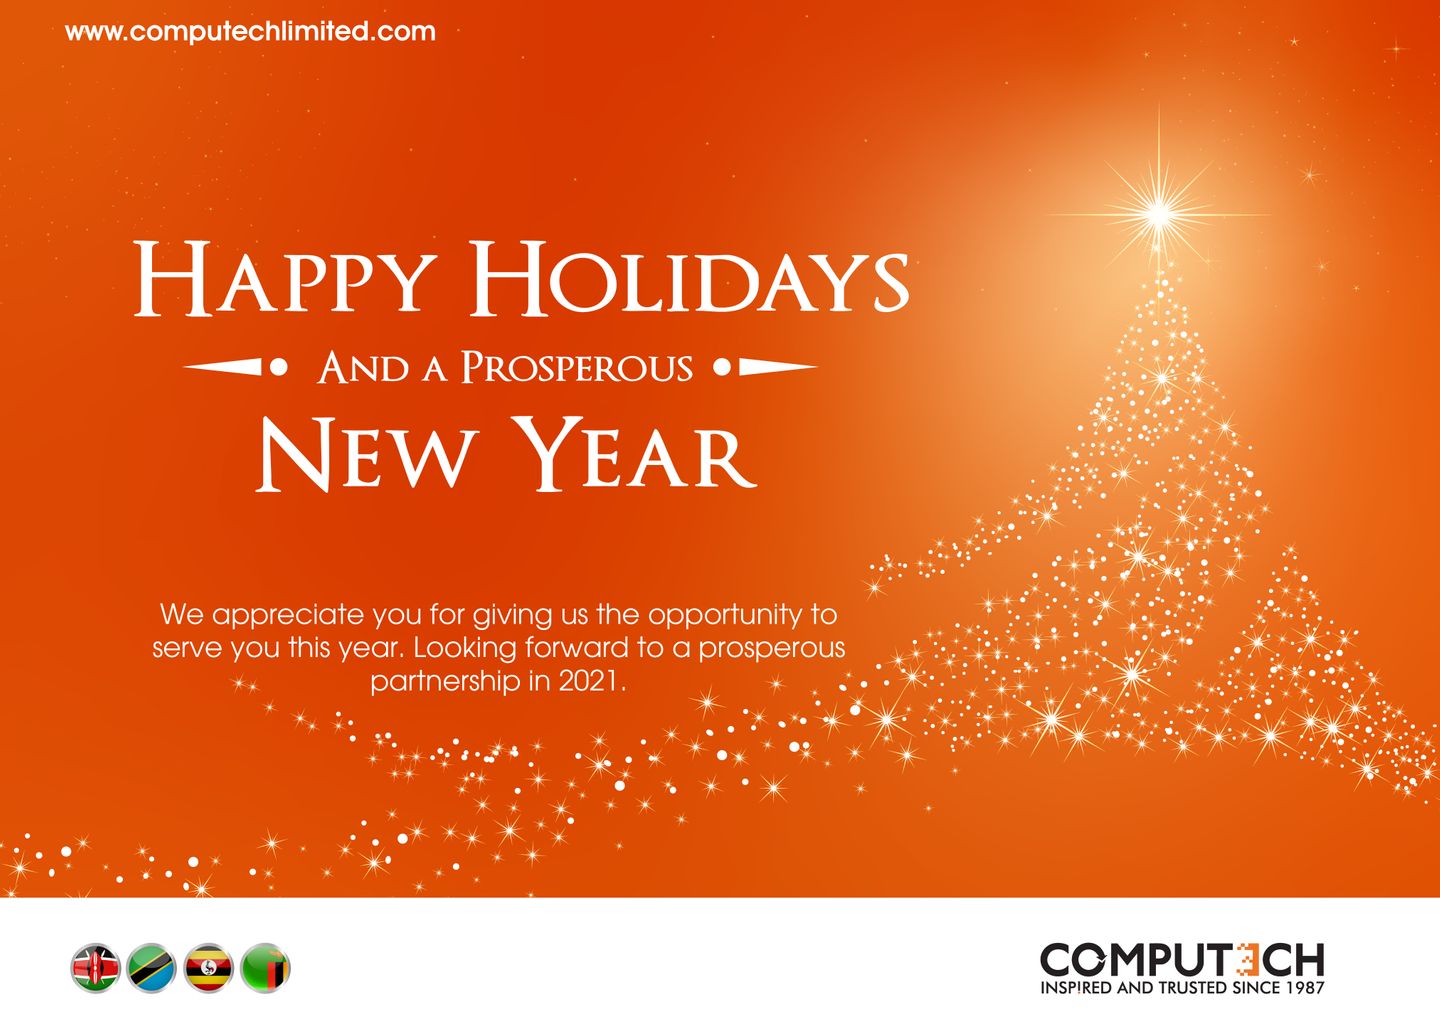 Figure 1: Happy Holidays from Computech Limited: We wish you a Merry Christmas & a Happy New Year !